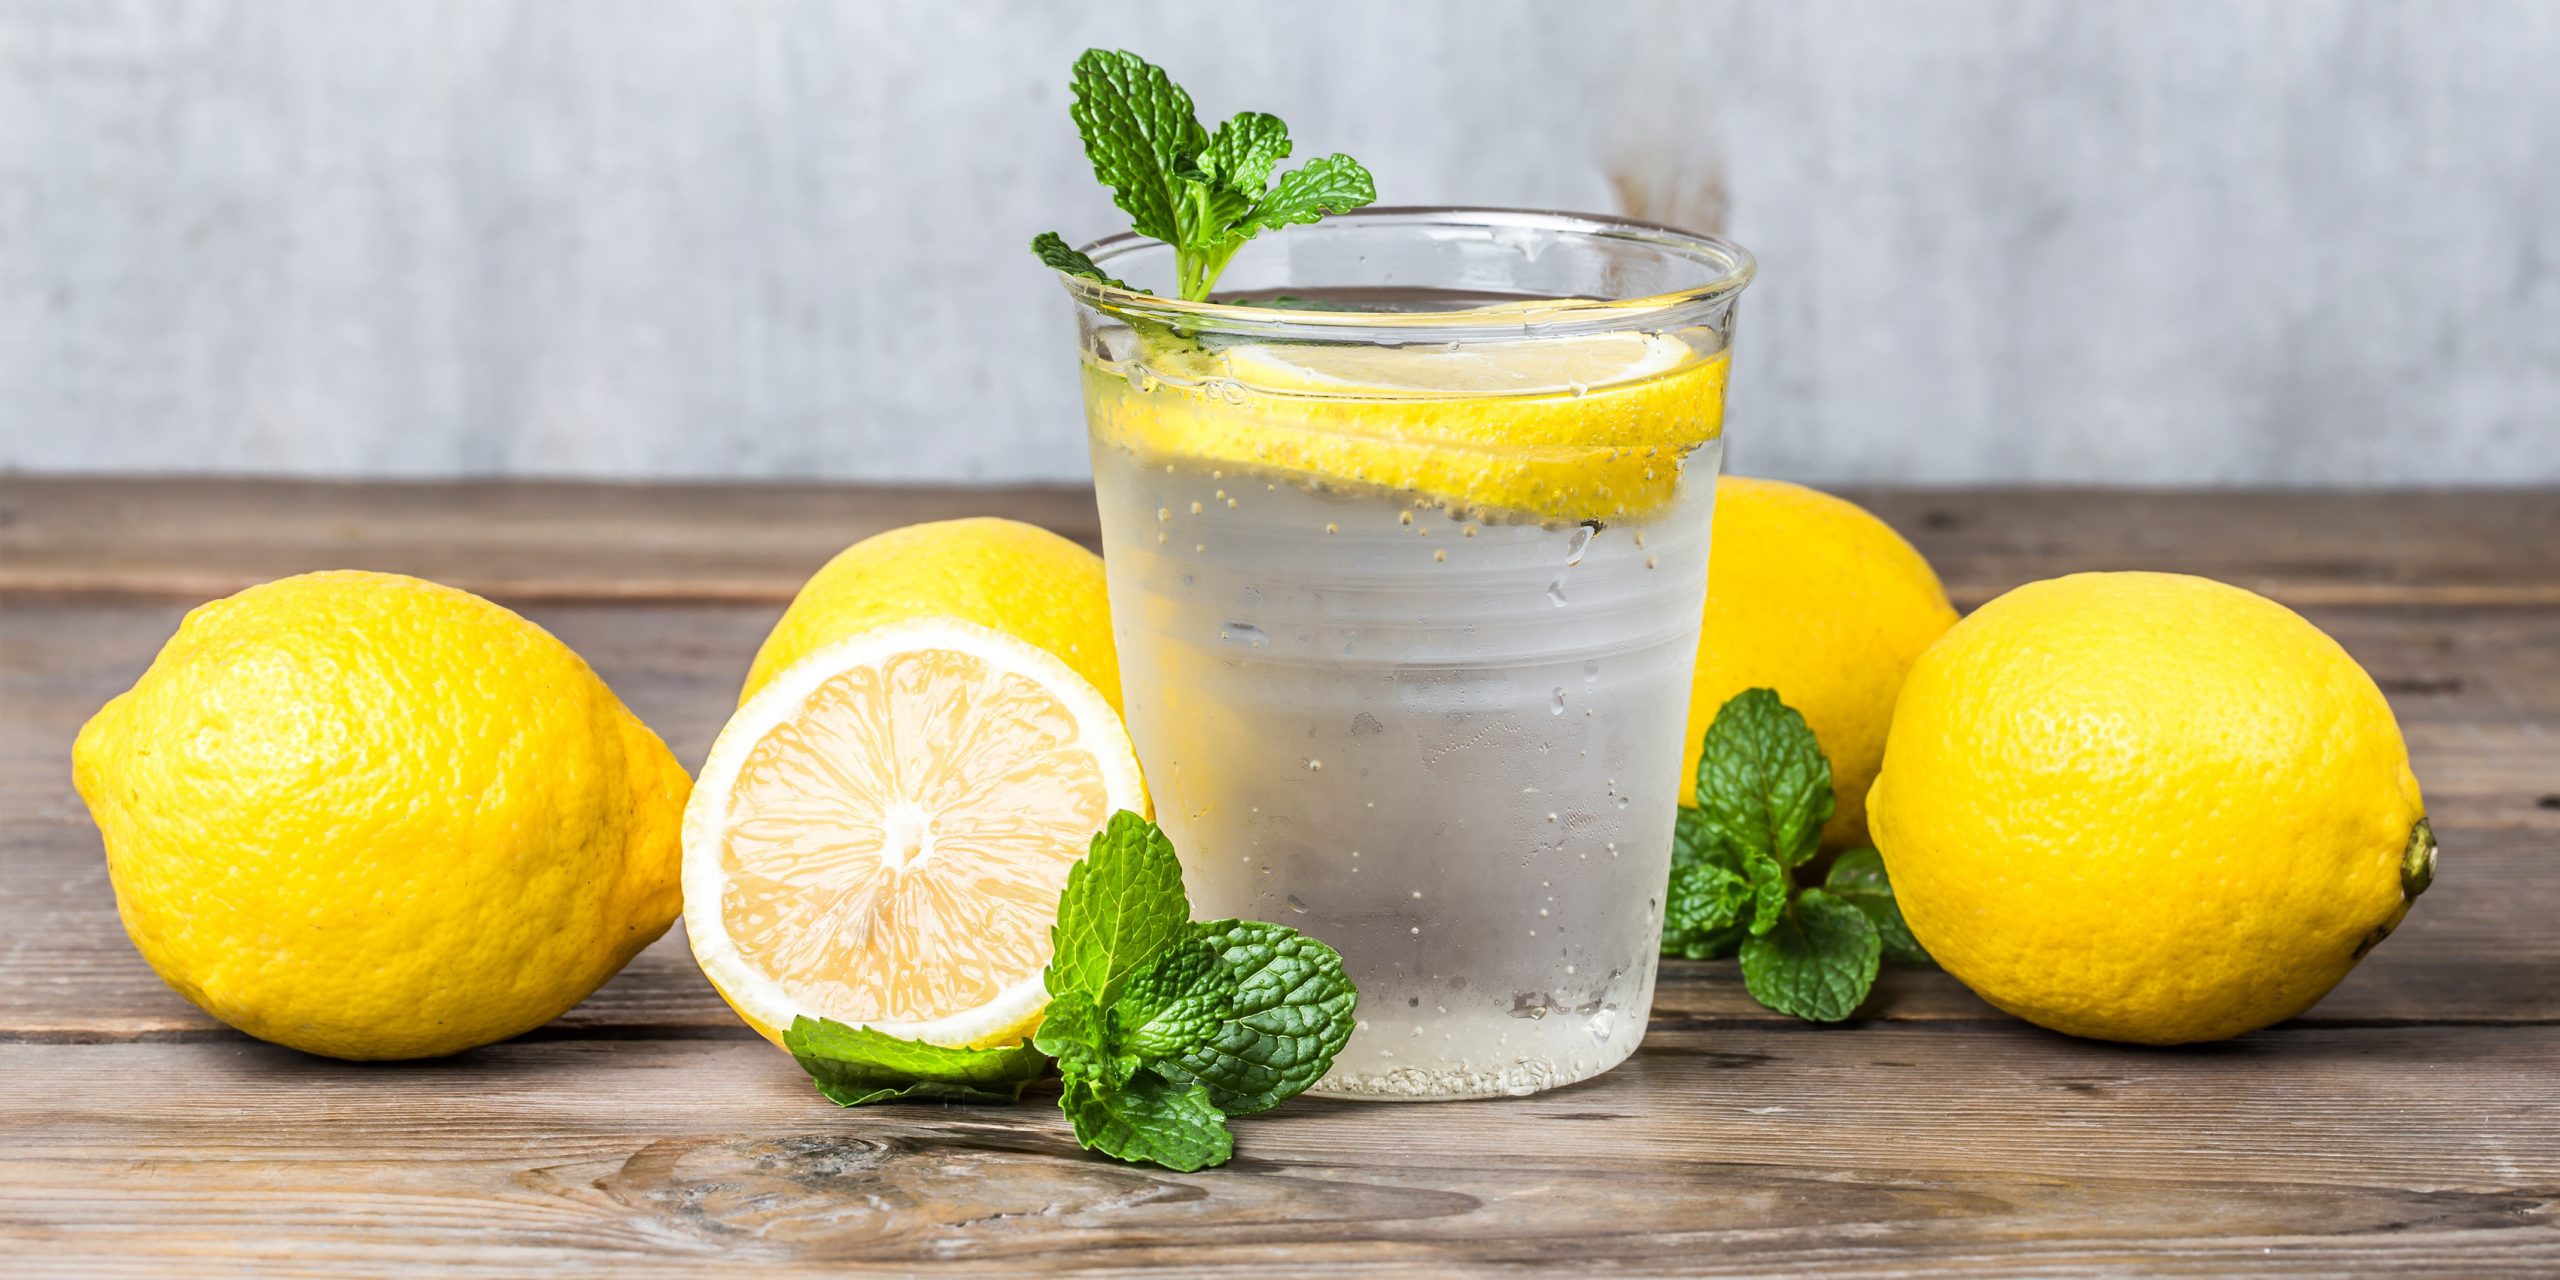 What are benefits of lemon water